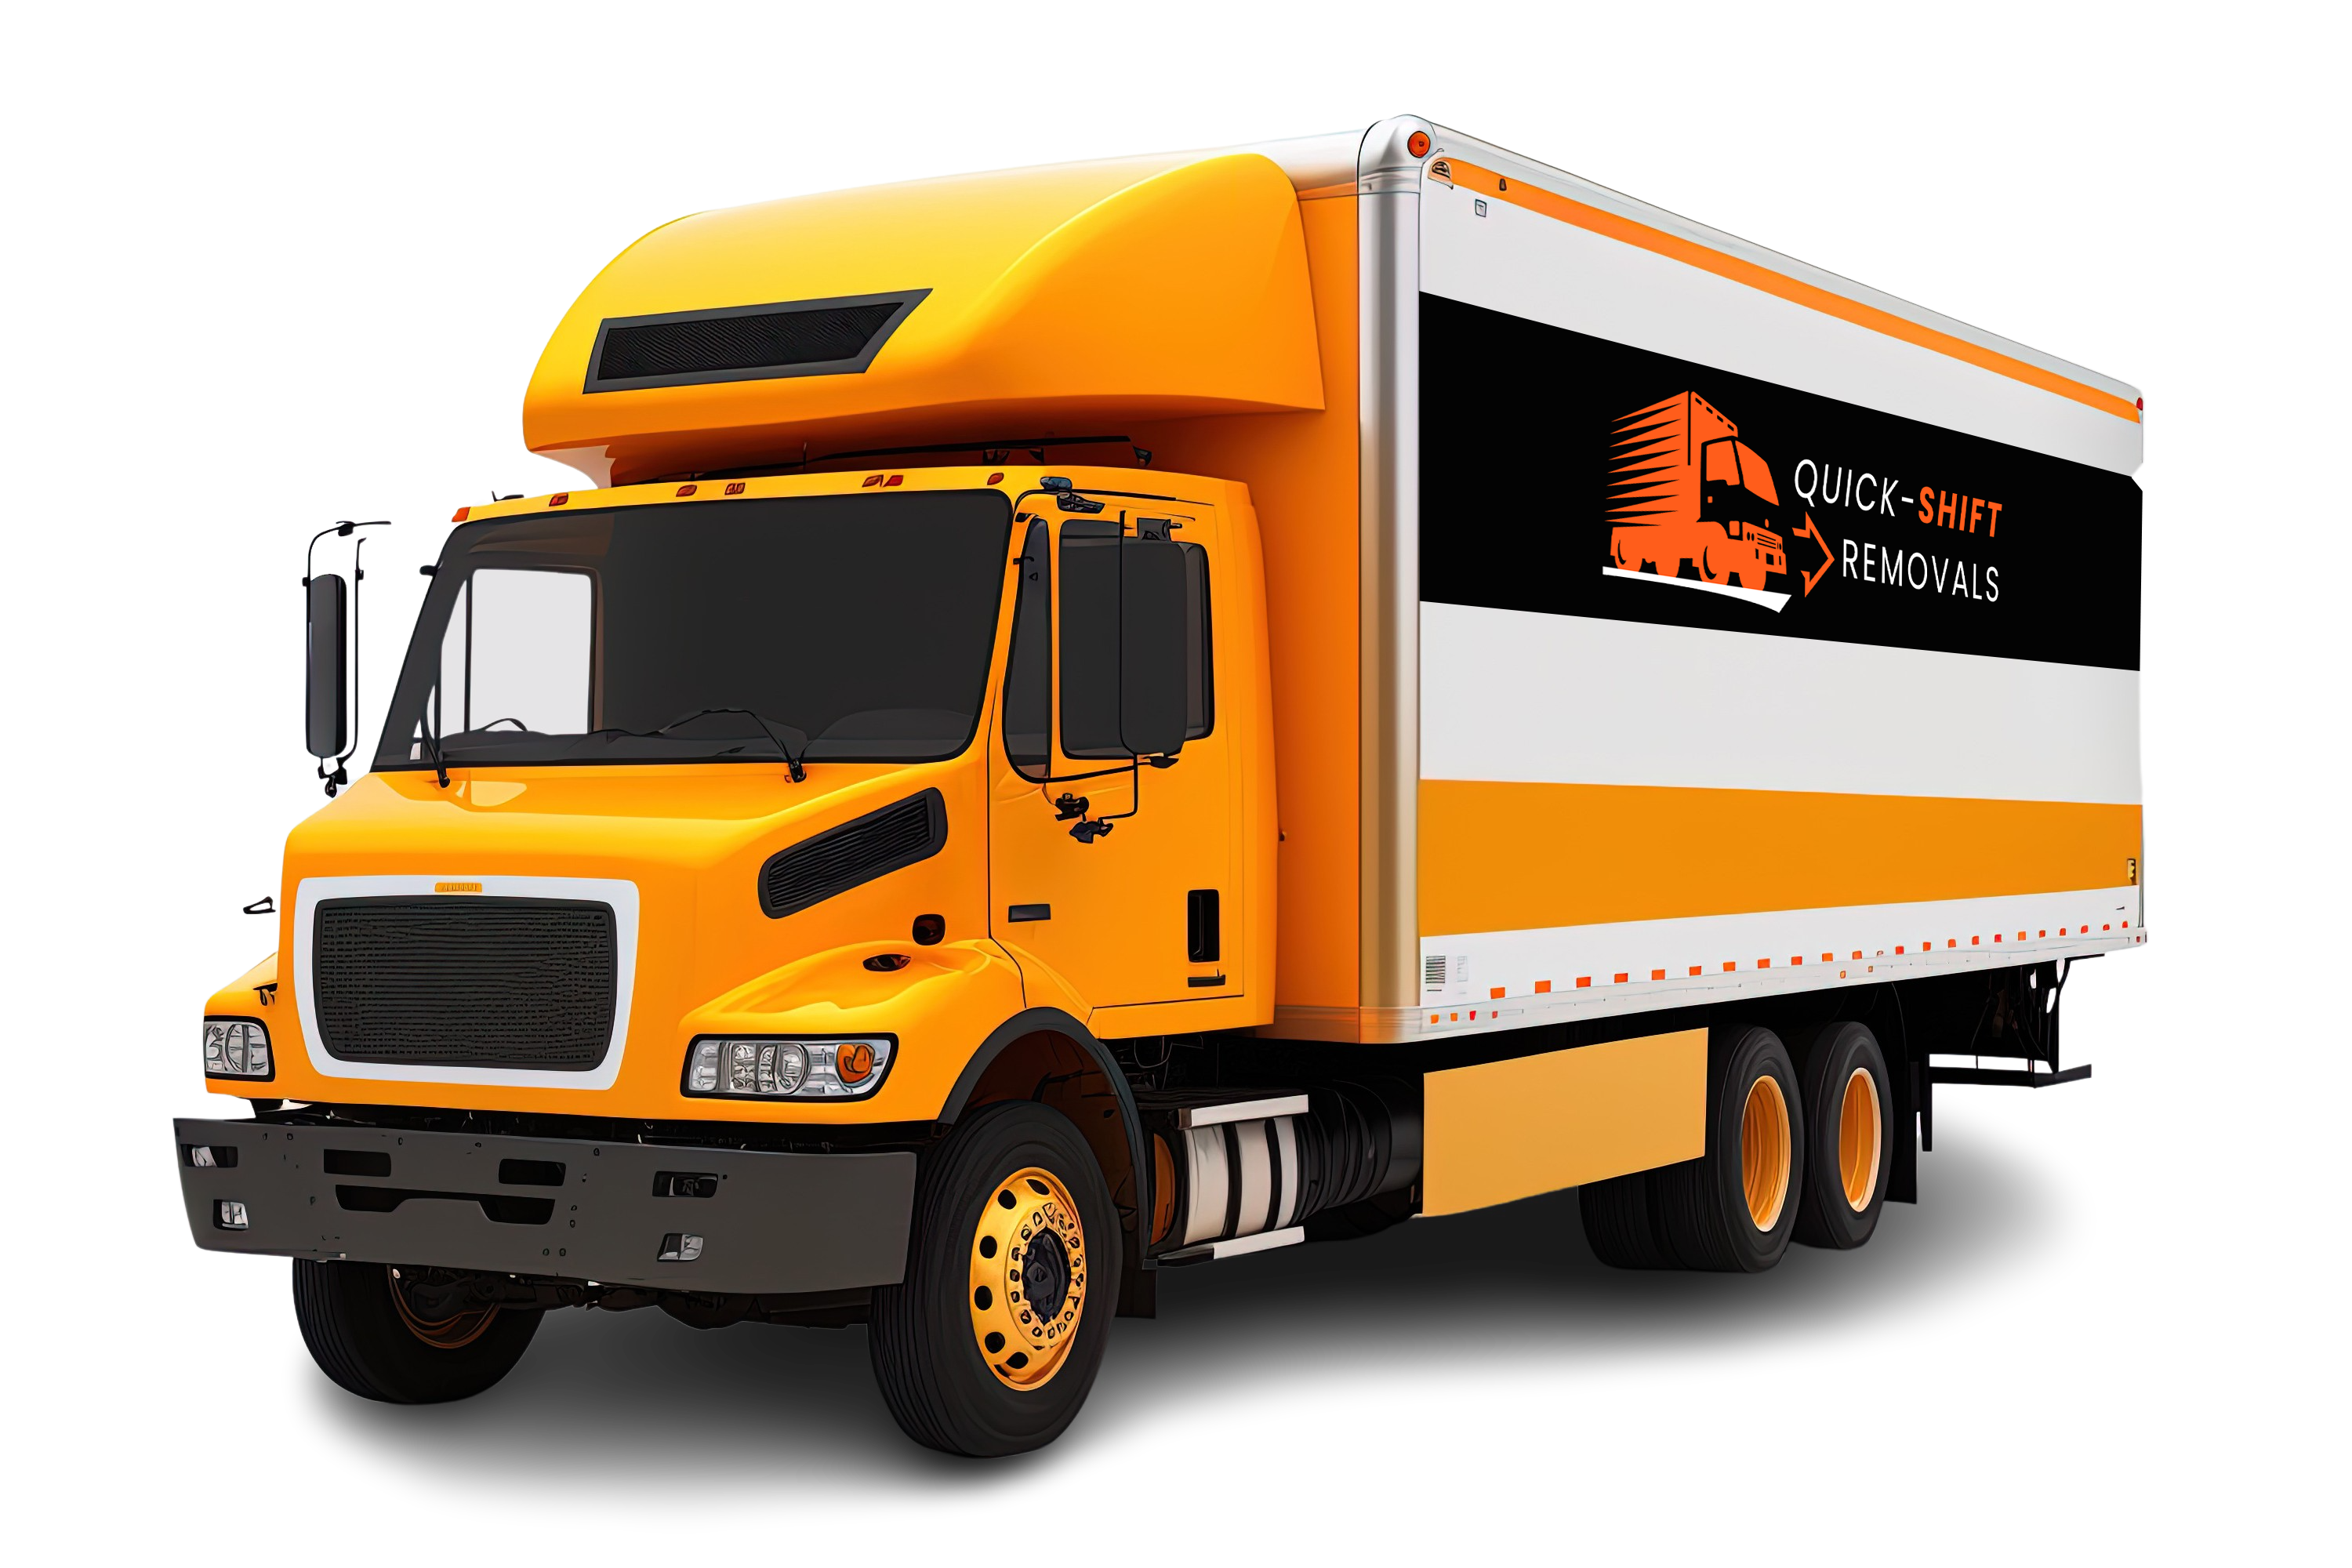 Movers and Packers Company Perth